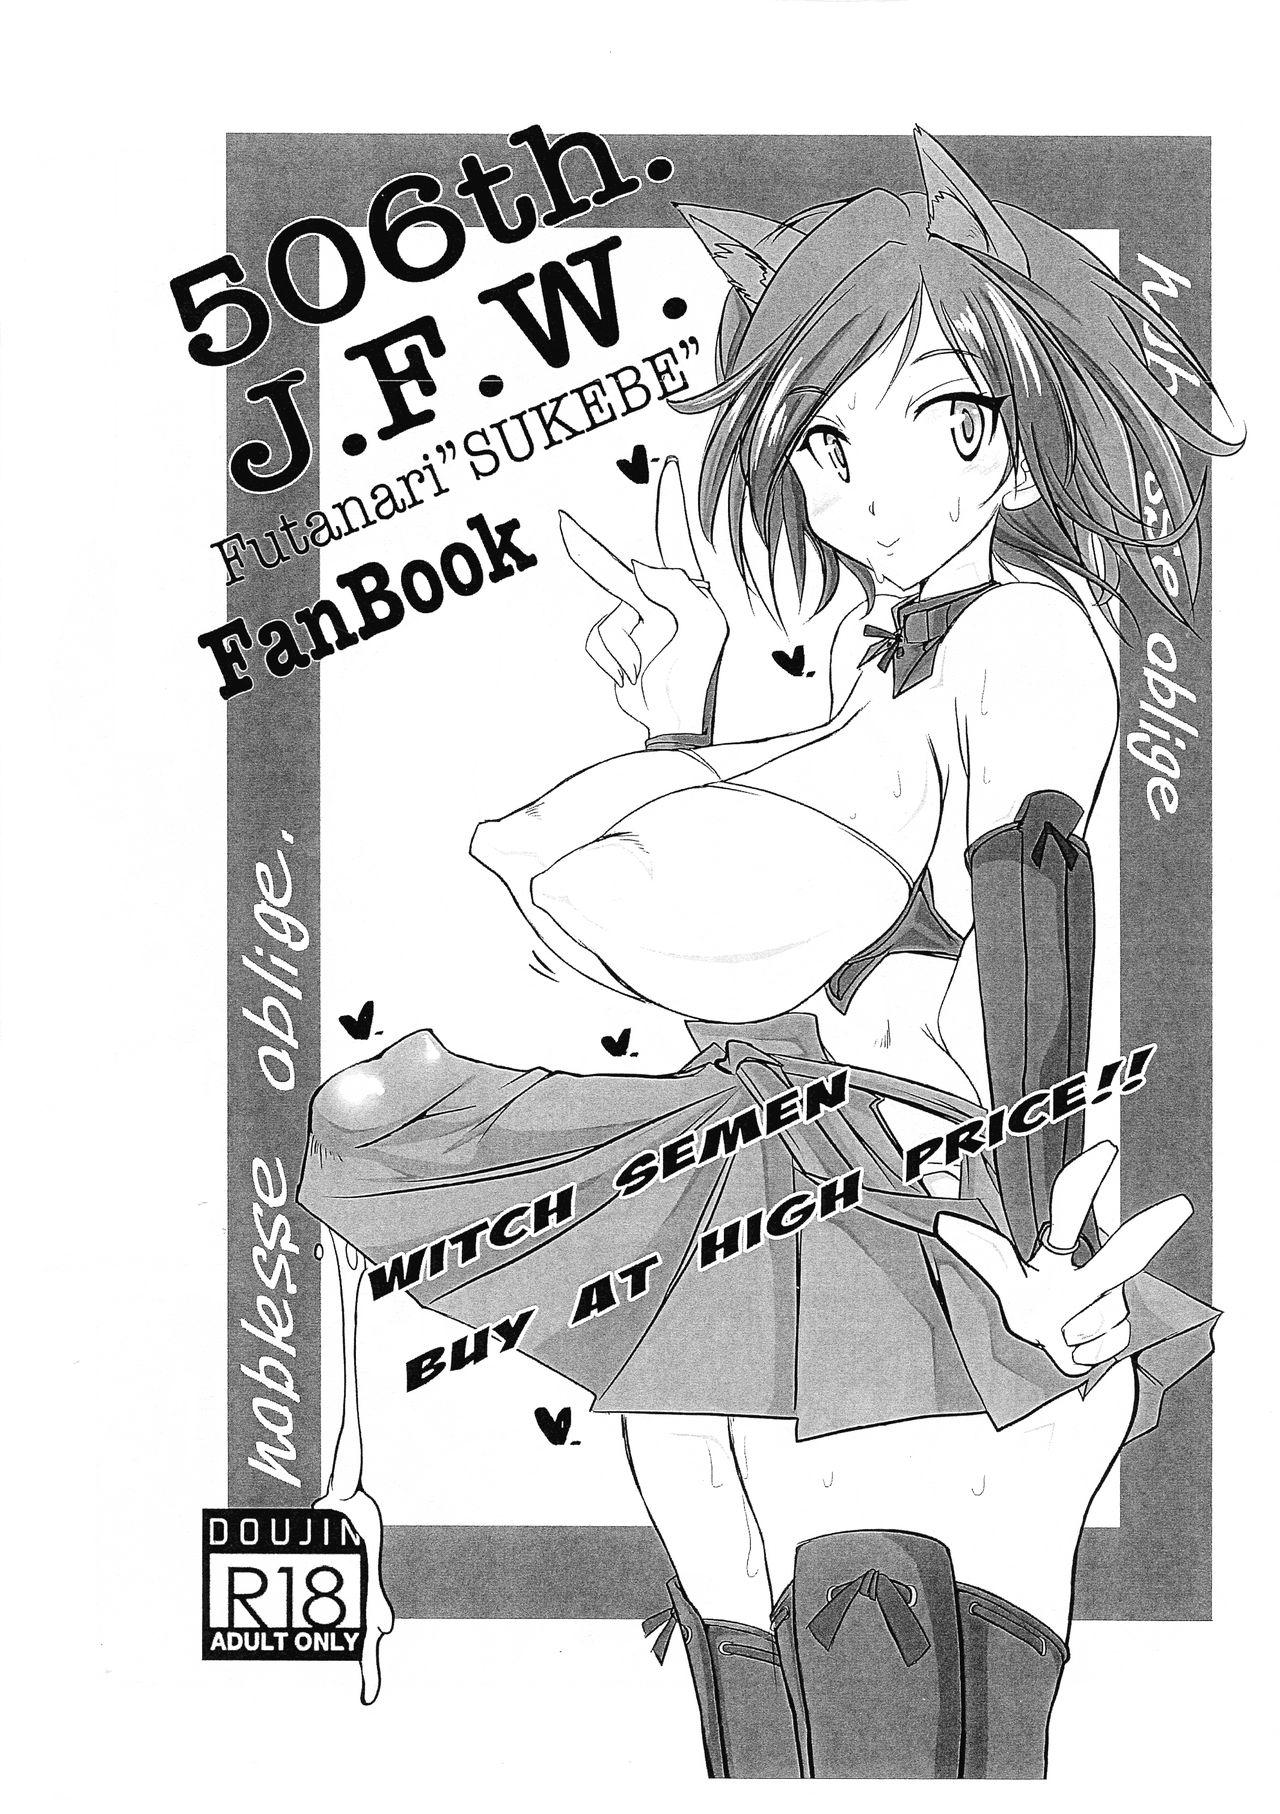 Hot Brunette 506th. J.F.W. - Strike witches Gay Outinpublic - Page 1